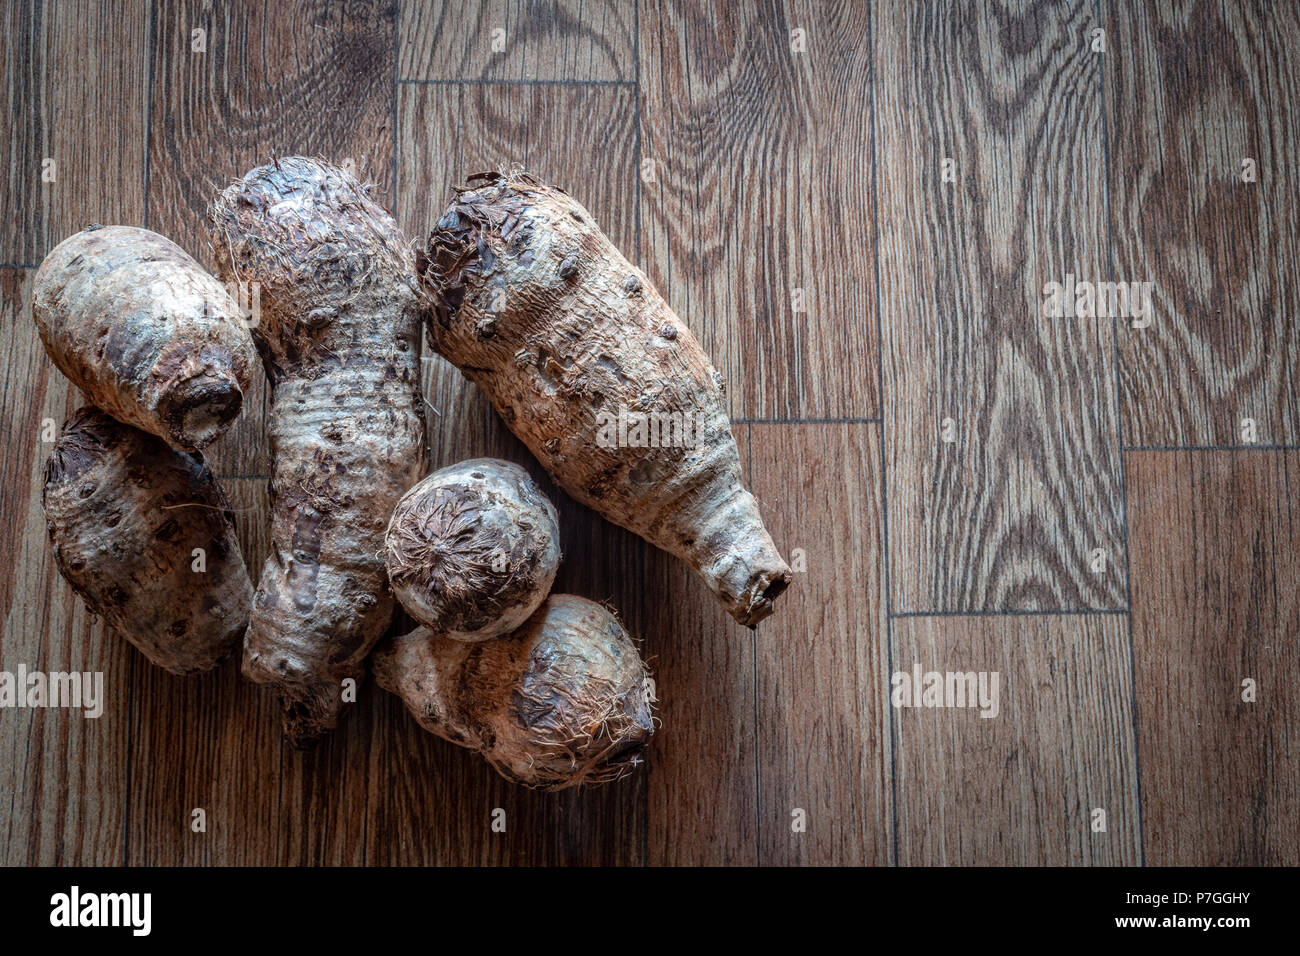 Taro root vegetable known as Dasheen in Jamaica, freshly harvested from the soil, isolated on background, copy space text Stock Photo